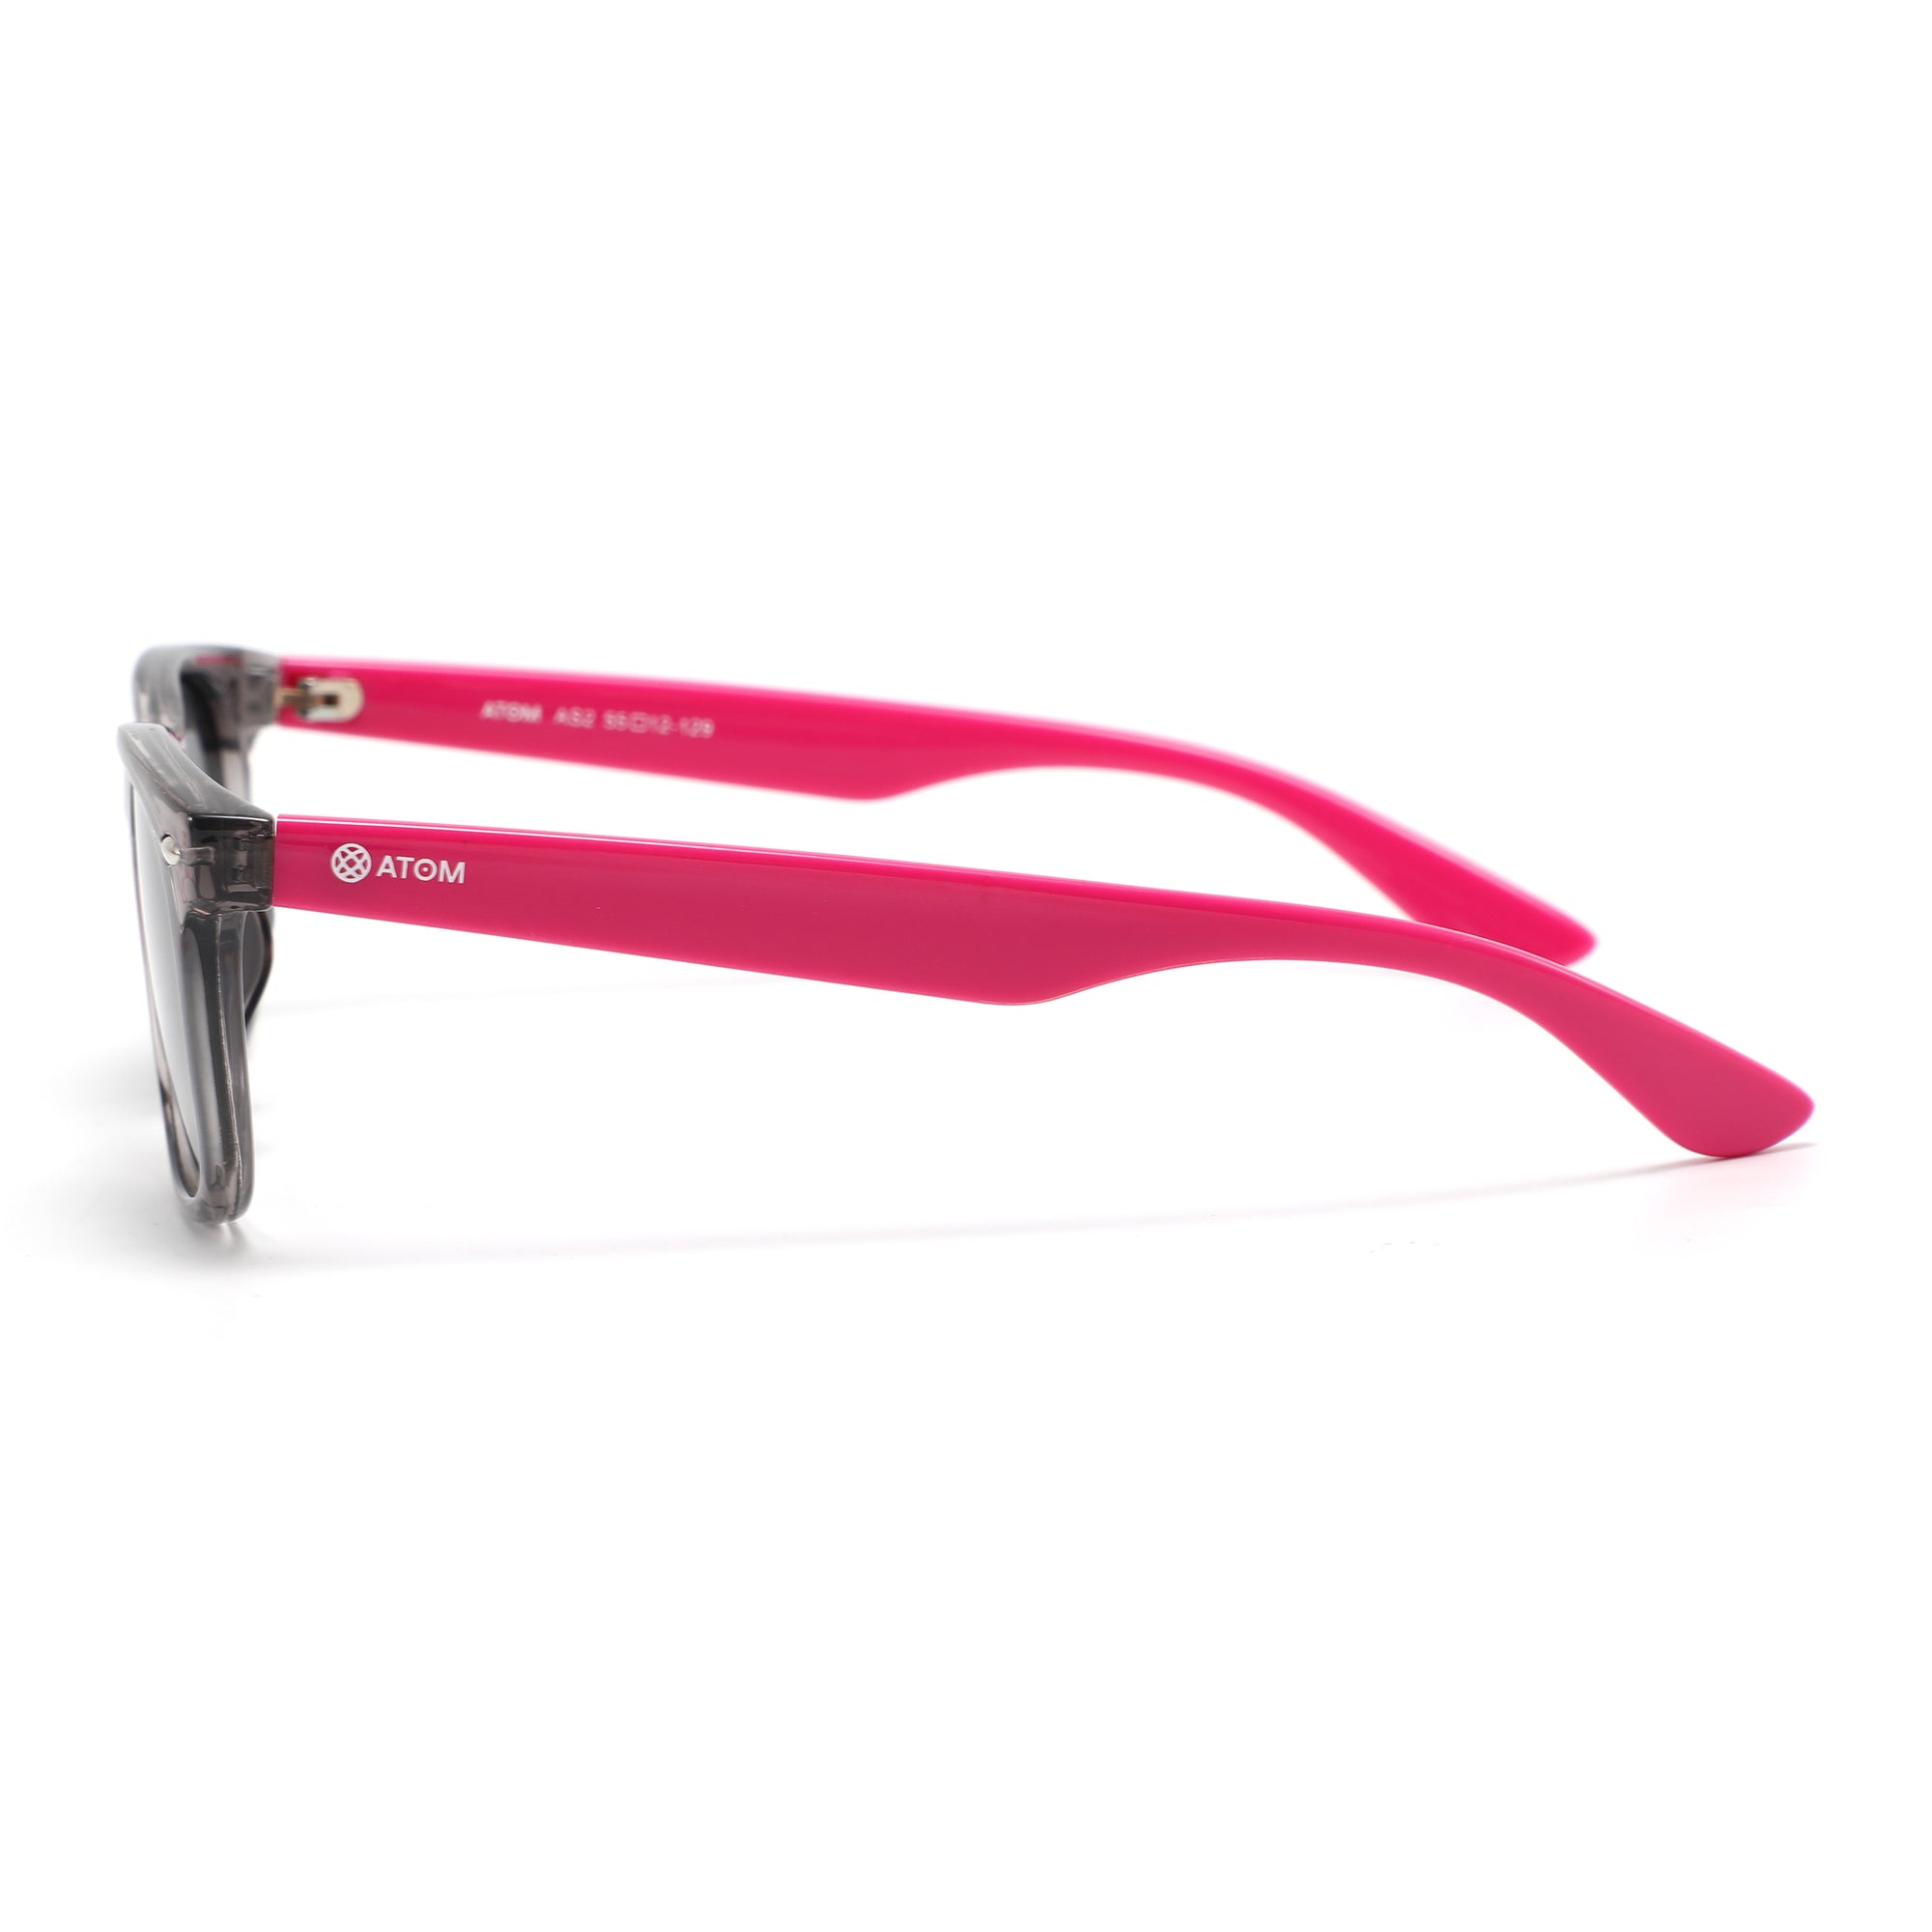 Side view of ATOM AS2-1 girls sunglasses with pink arms and transparent lenses